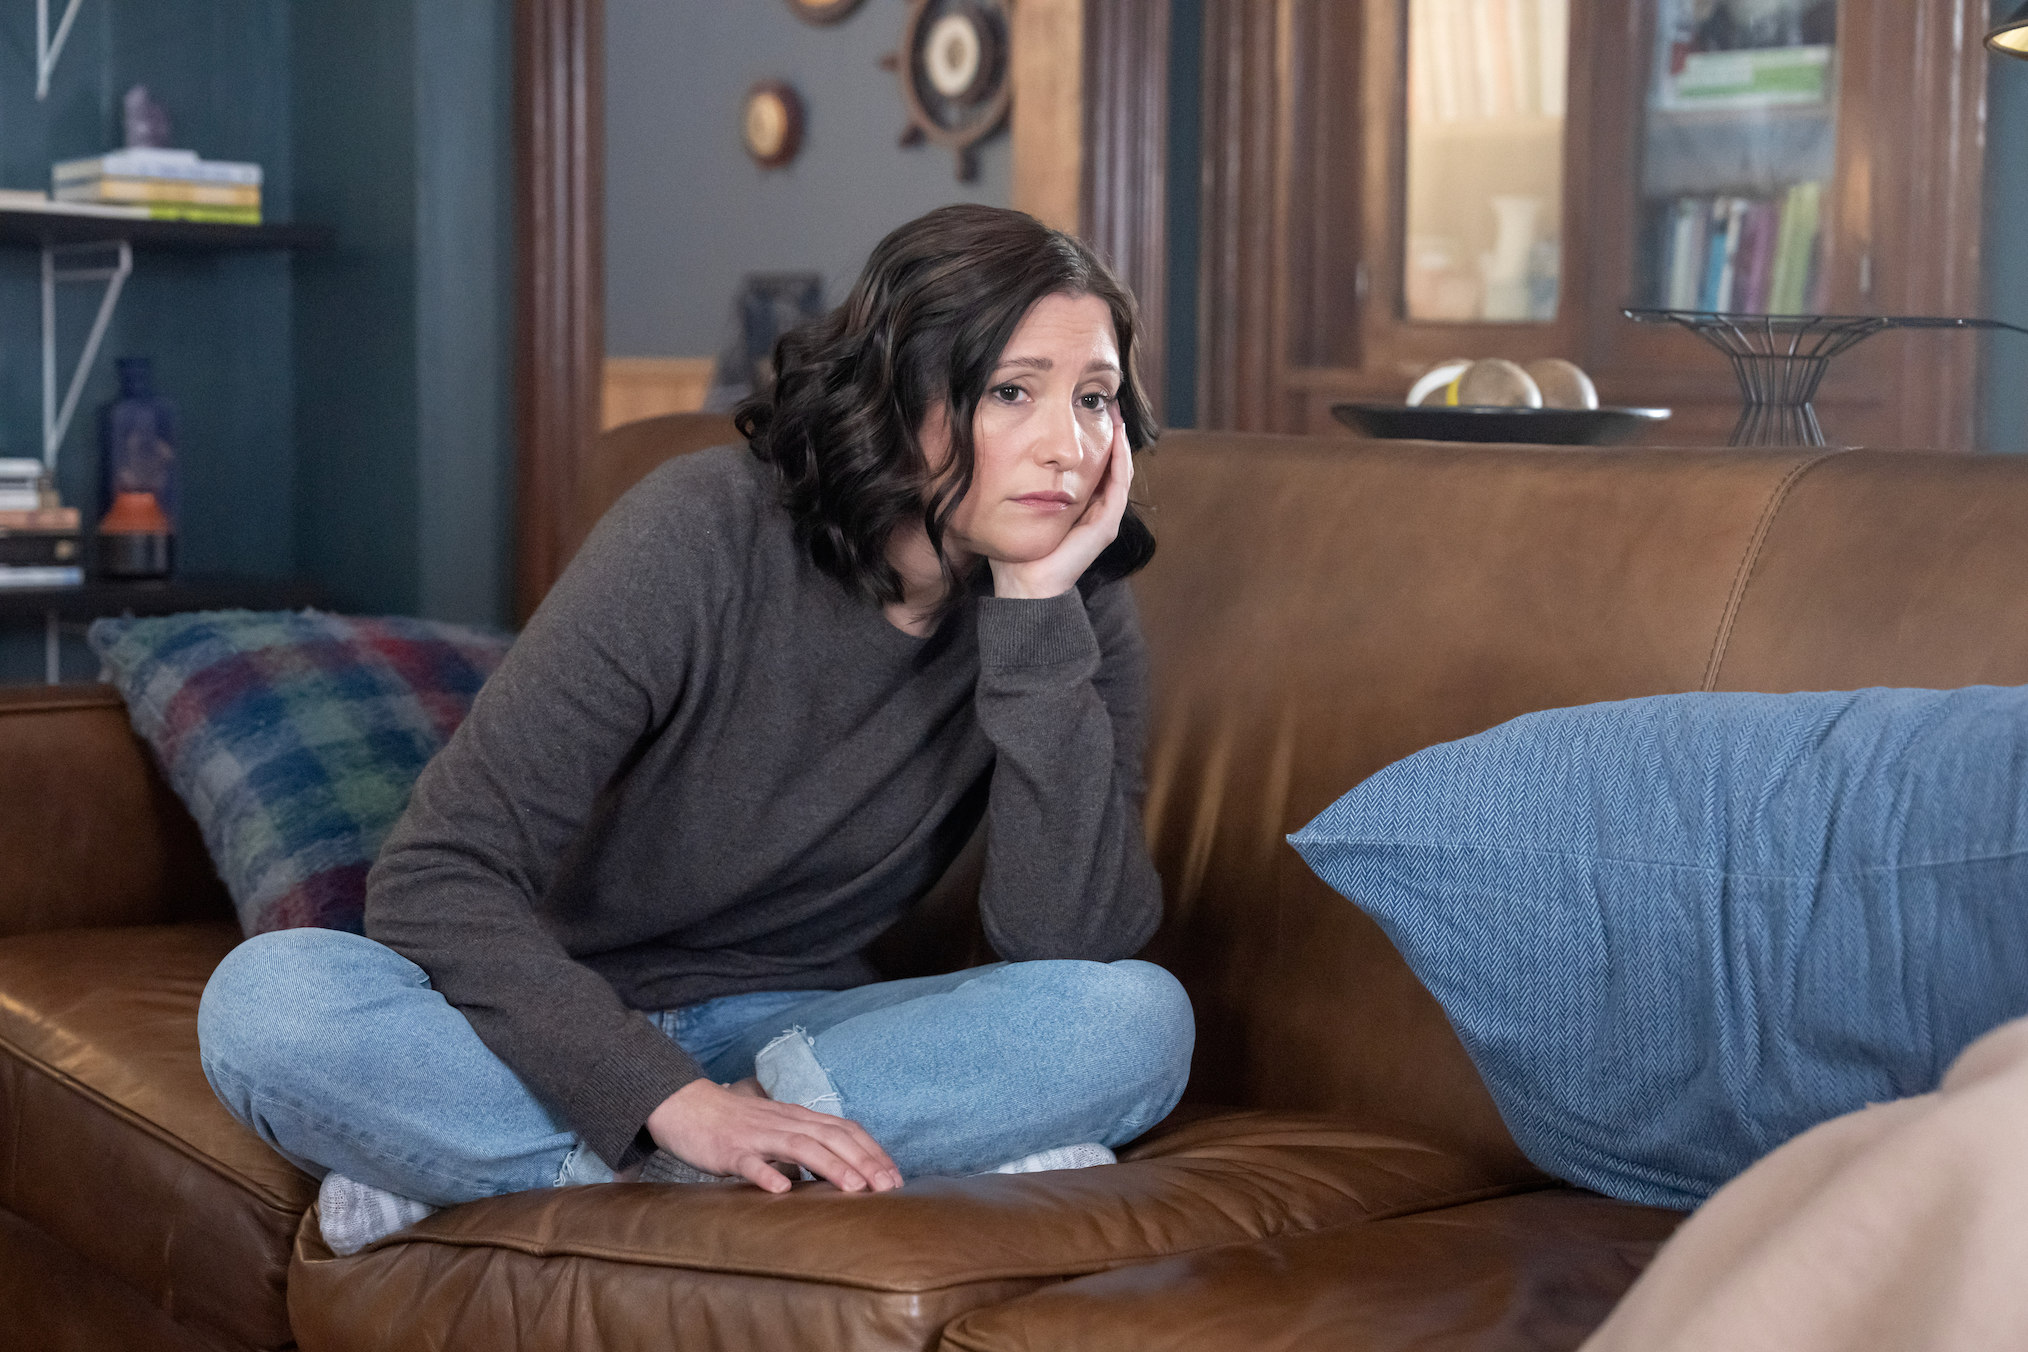 Chyler Leigh in 'The Way Home'